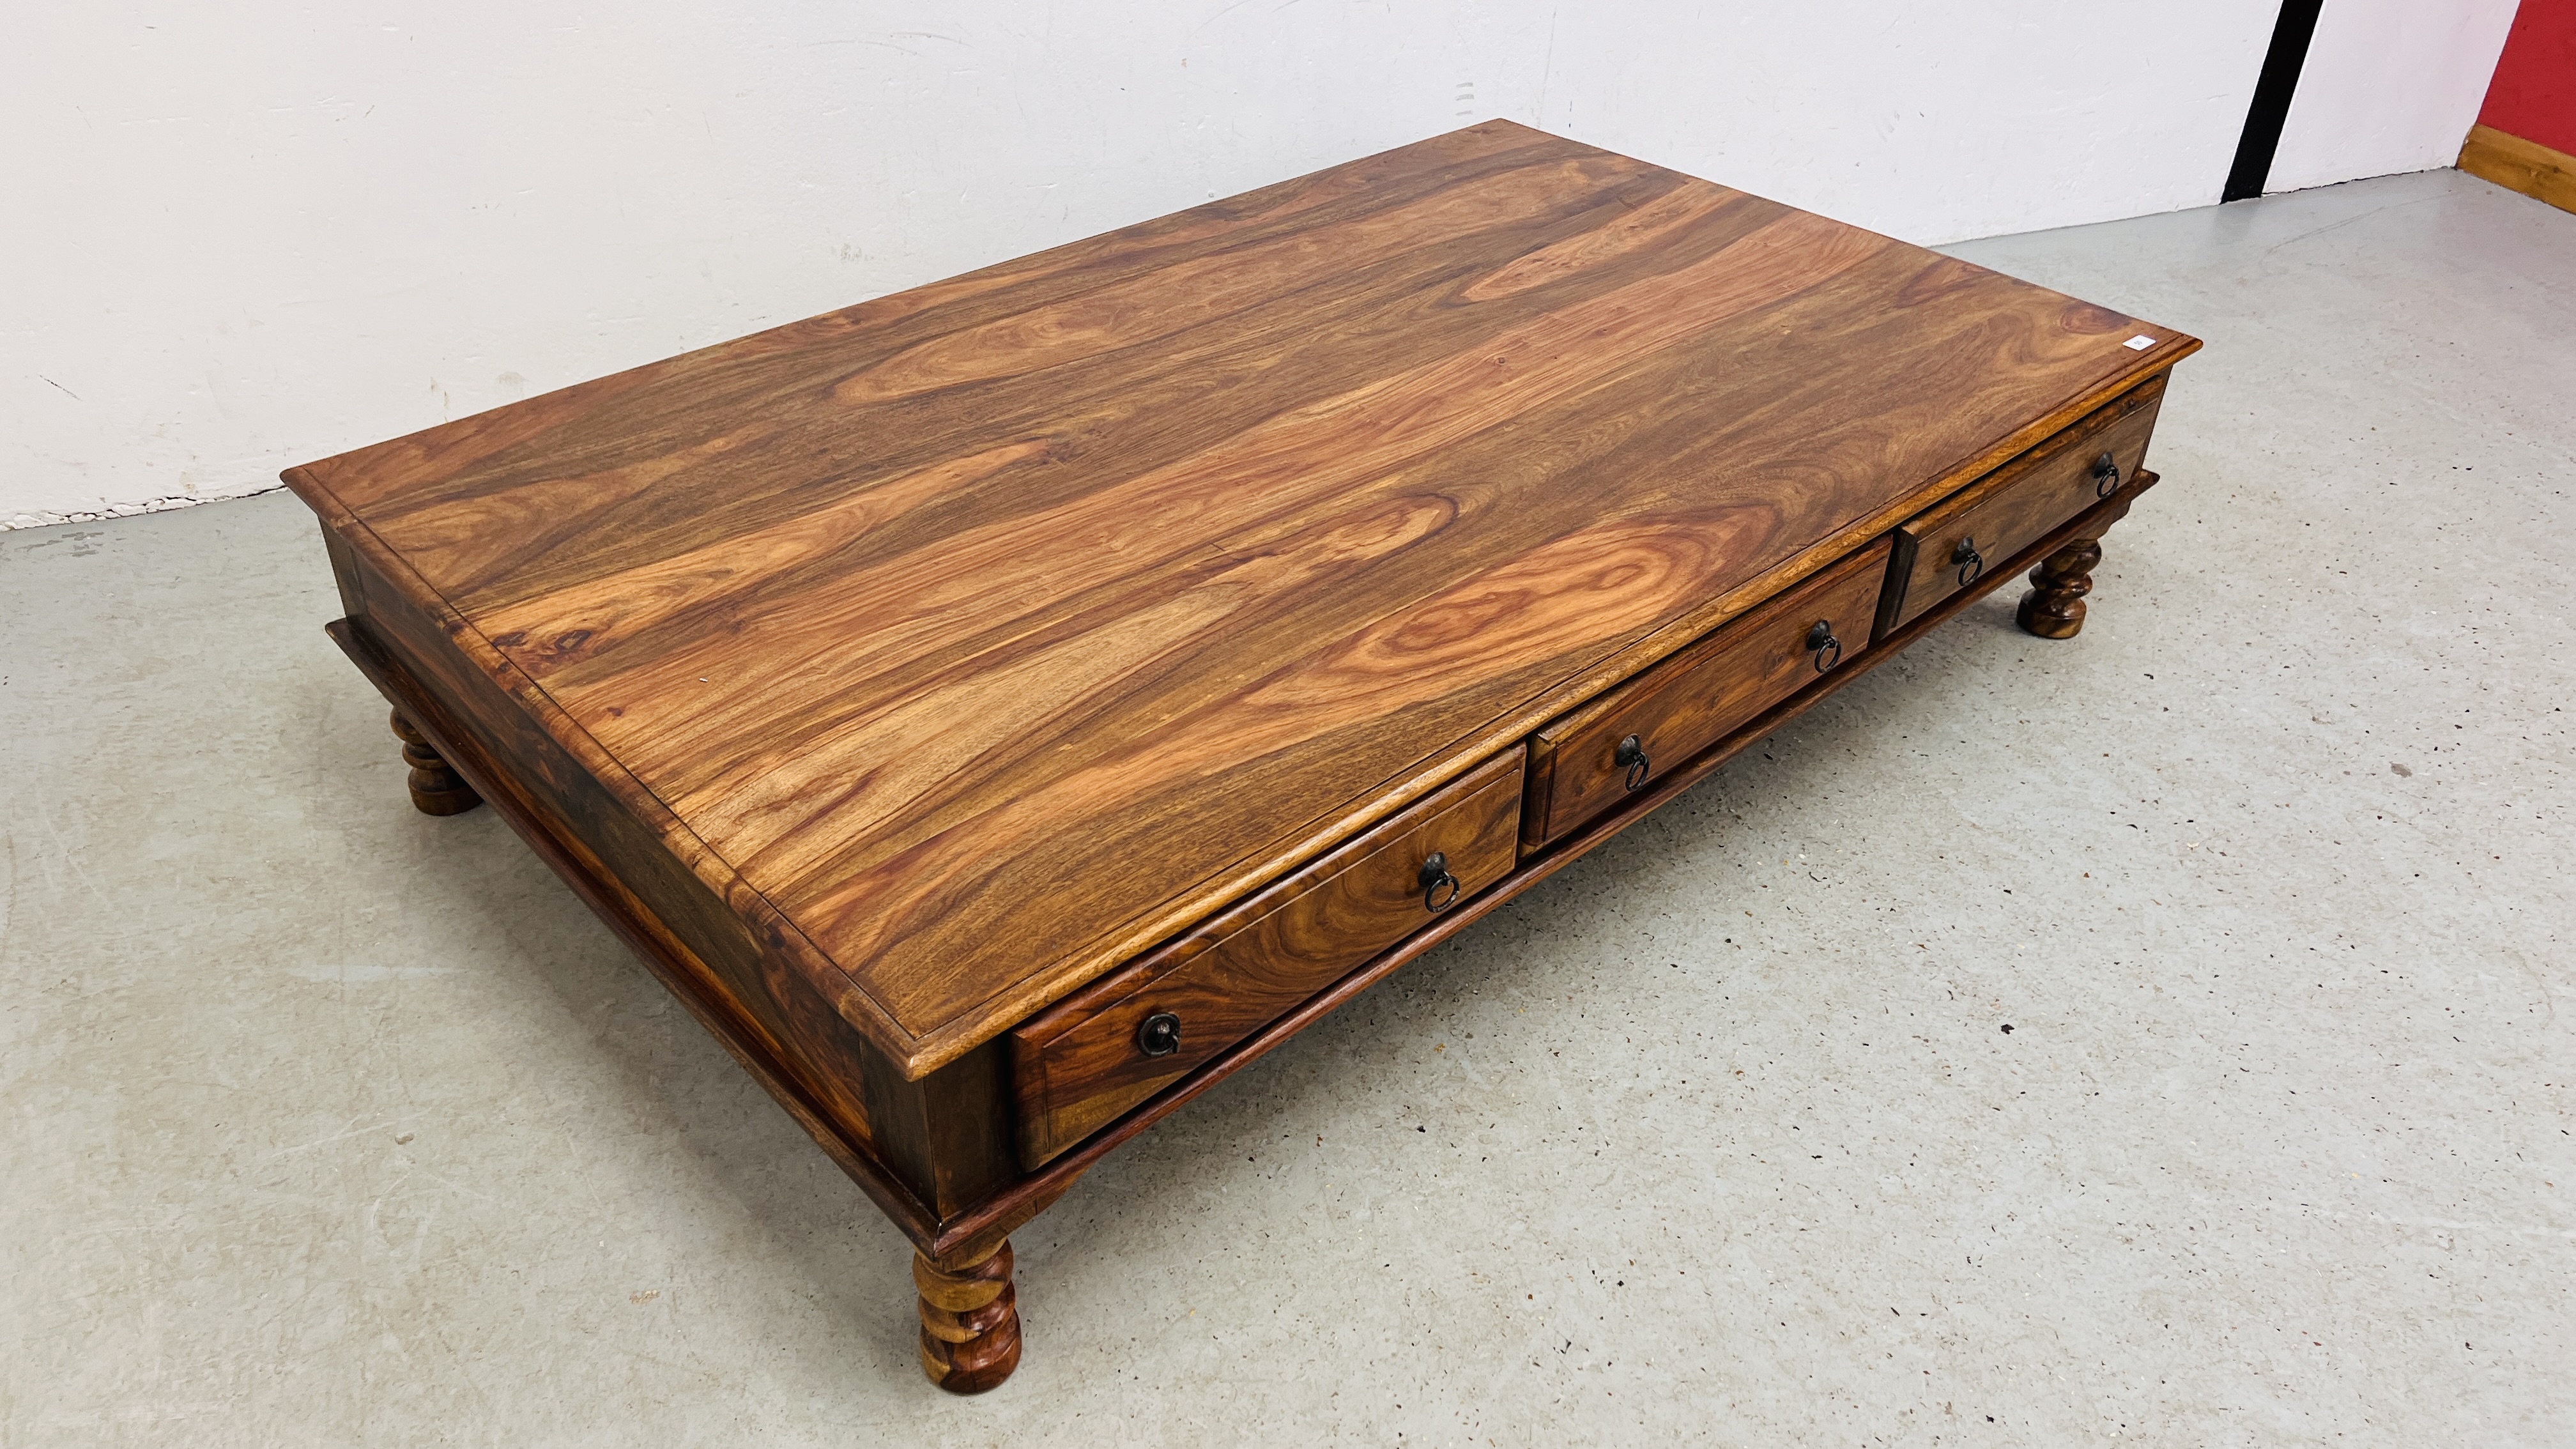 A MODERN ORIENTAL HARDWOOD COFFEE TABLE WITH FRIEZE DRAWERS 181CM. LONG. - Image 10 of 15